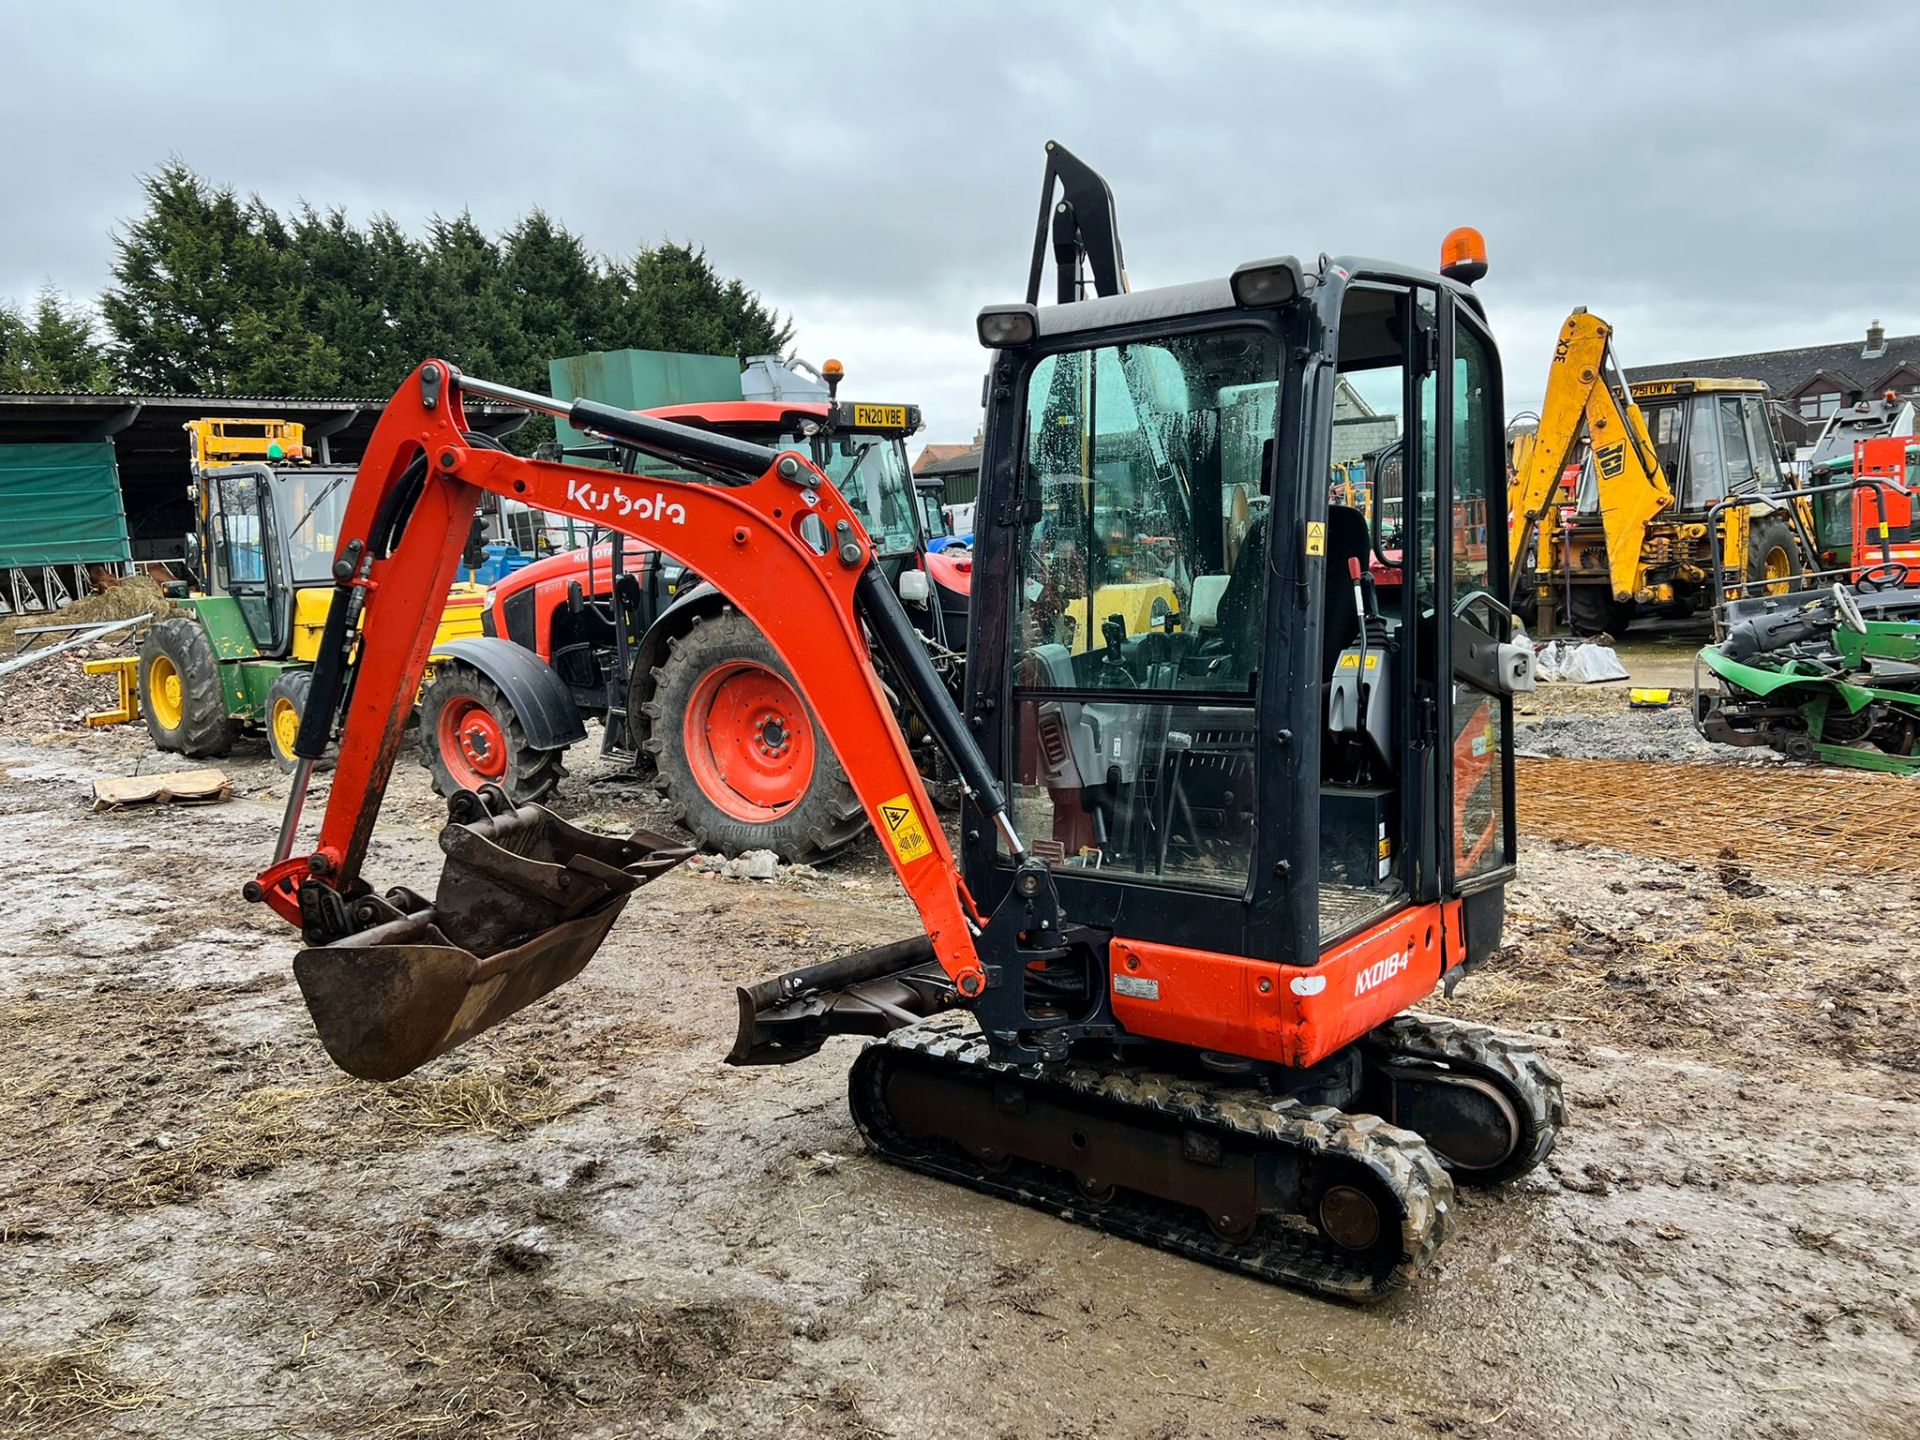 2018 KUBOTA KX018-4 1.8 TON MINI DIGGER, RUNS DRIVES AND DIGS, SHOWING A LOW 1681 HOURS - Image 2 of 20